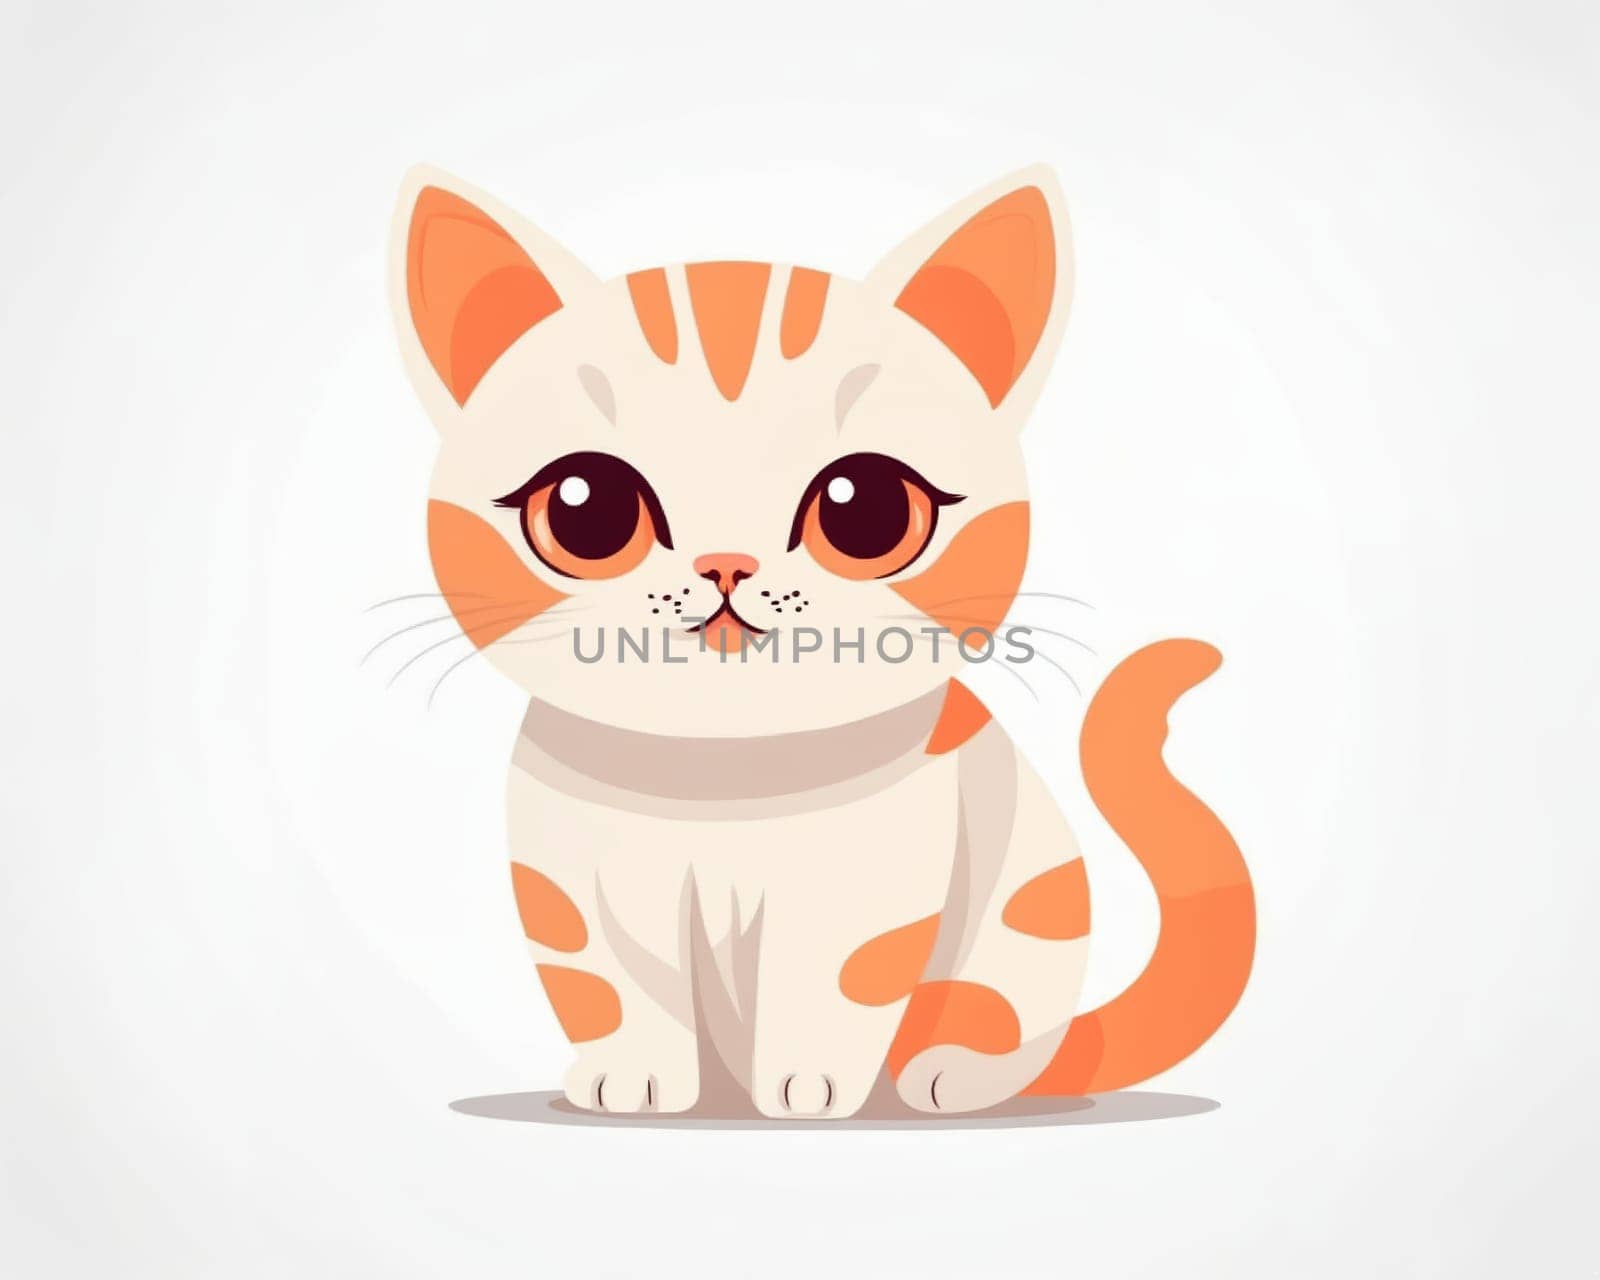 Cute cat illustration. Cute cartoon kitty character. by Andre1ns